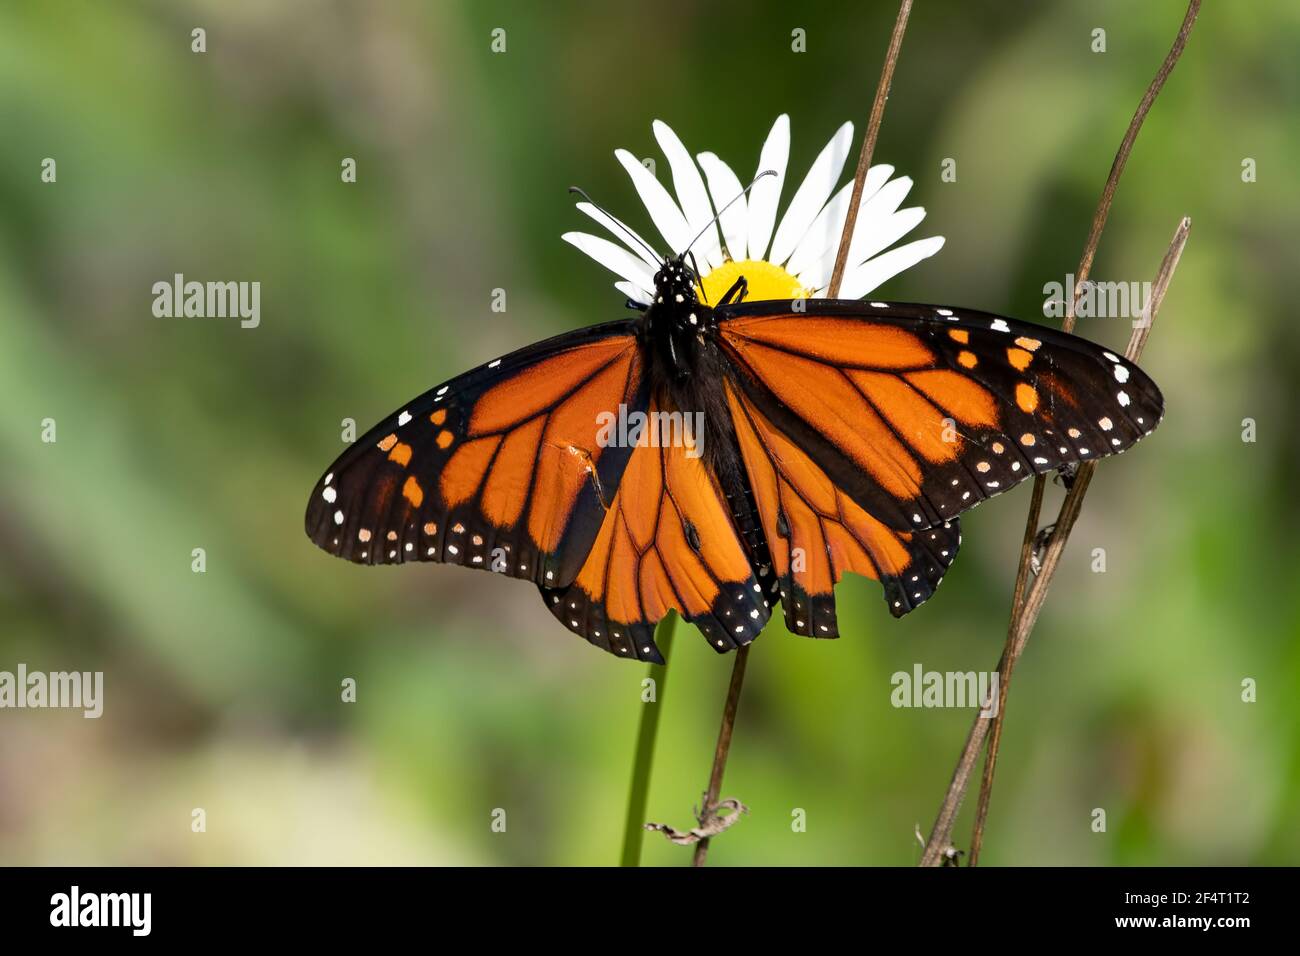 Bright orange Monarch butterfly on a daisy wildflower Stock Photo